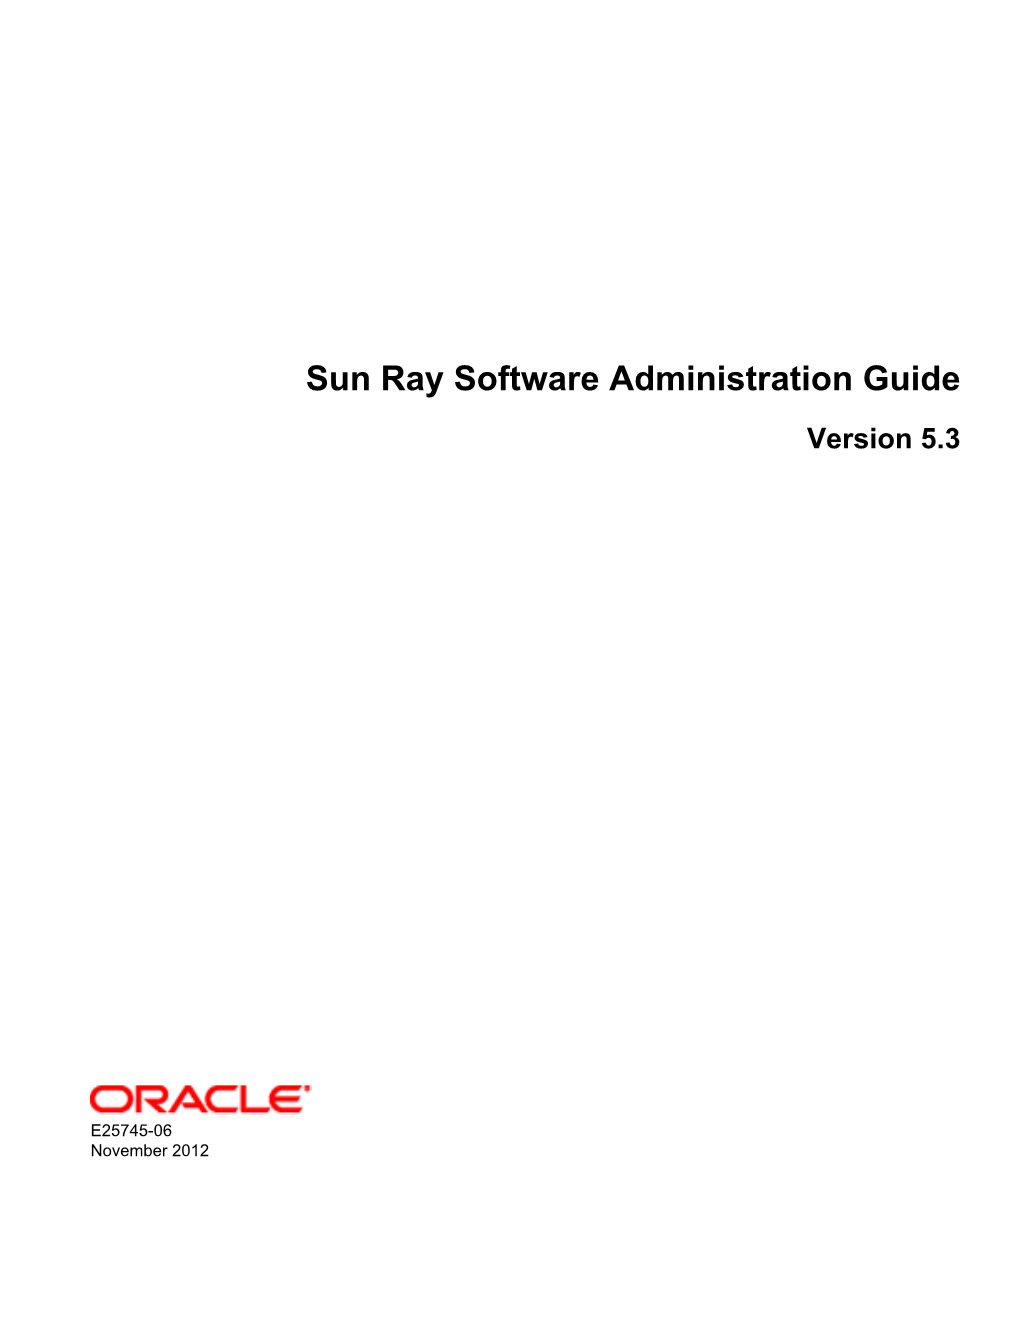 Sun Ray Software Administration Guide Version 5.3